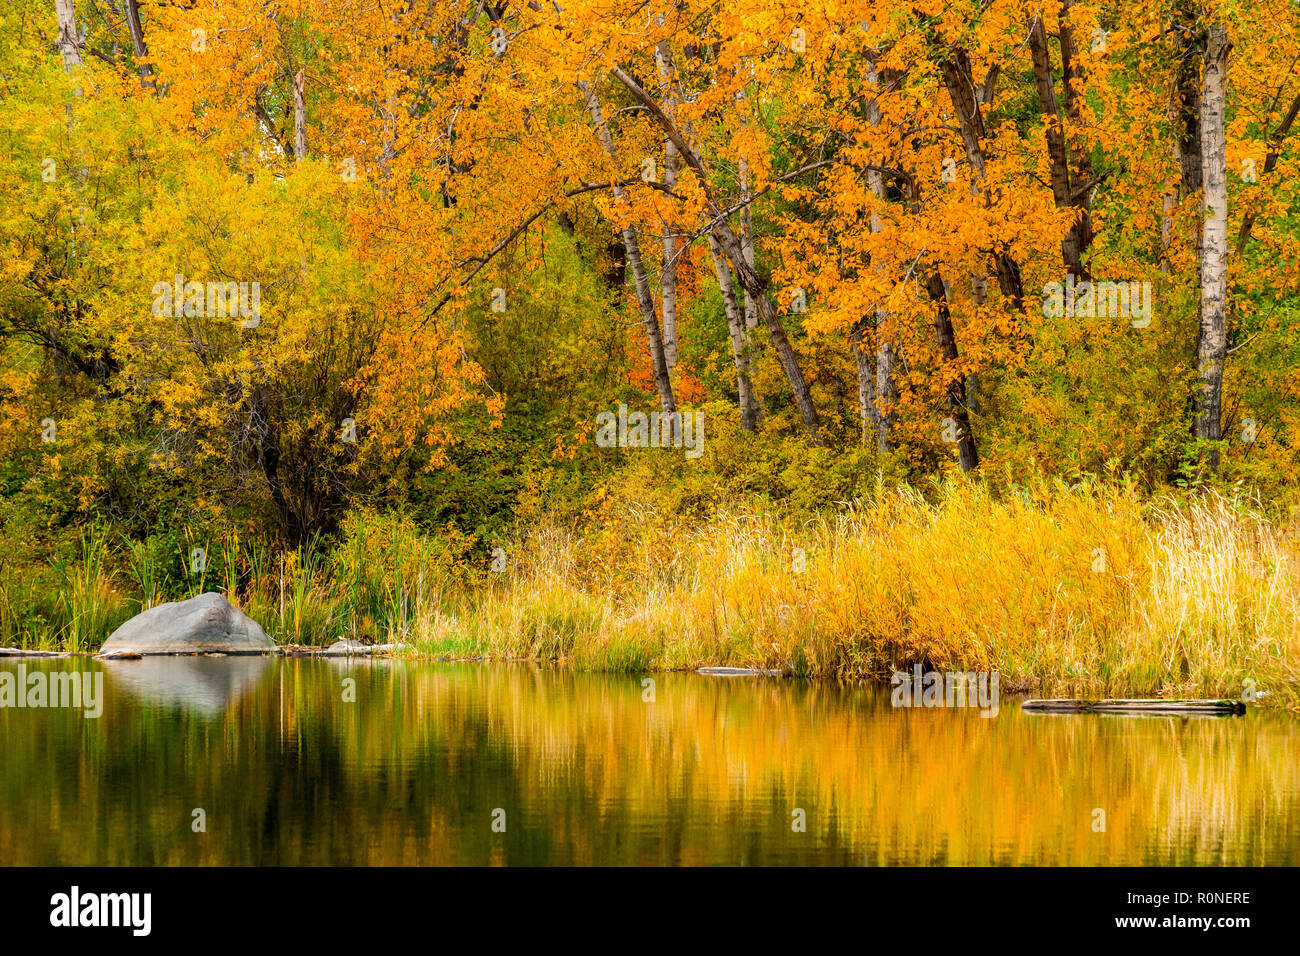 A tranquil scene at Tims Pond during autumn in Washington state Stock Photo